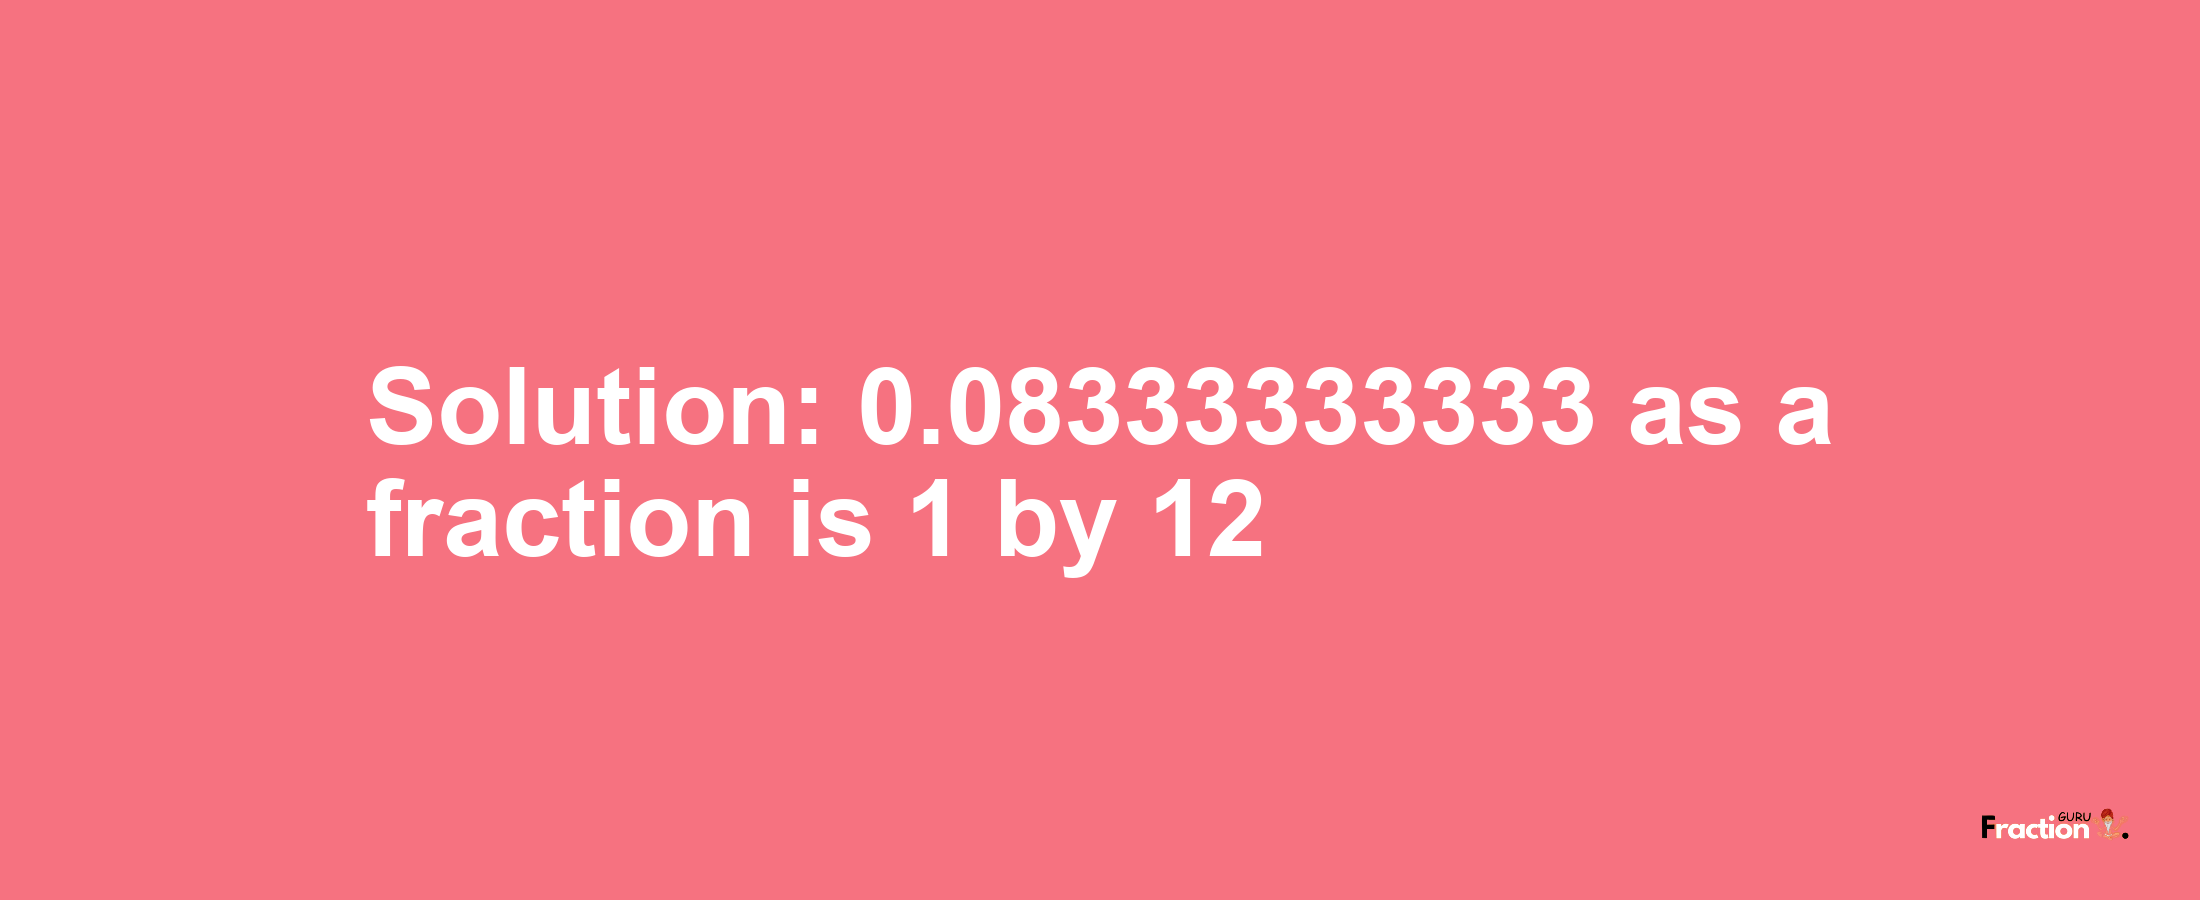 Solution:0.08333333333 as a fraction is 1/12